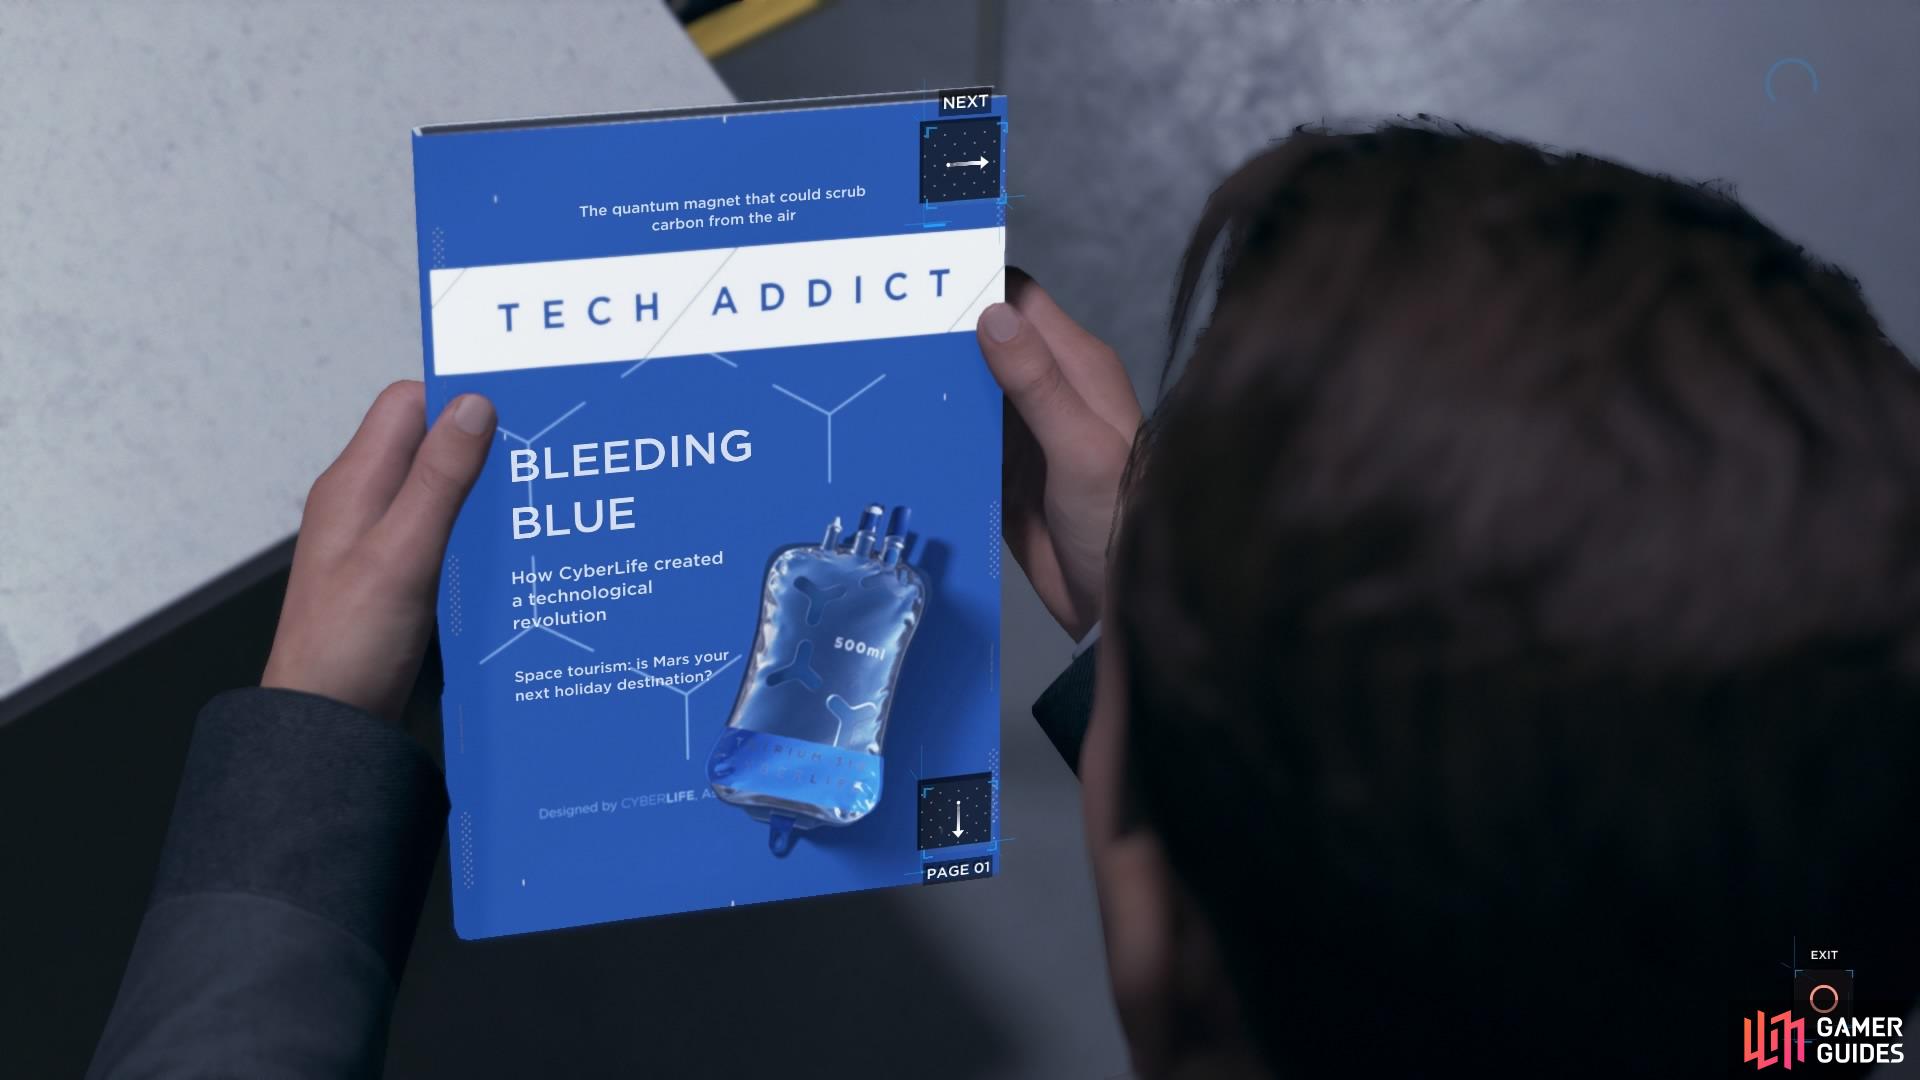 Review: Detroit: Become Human - Enemy Slime